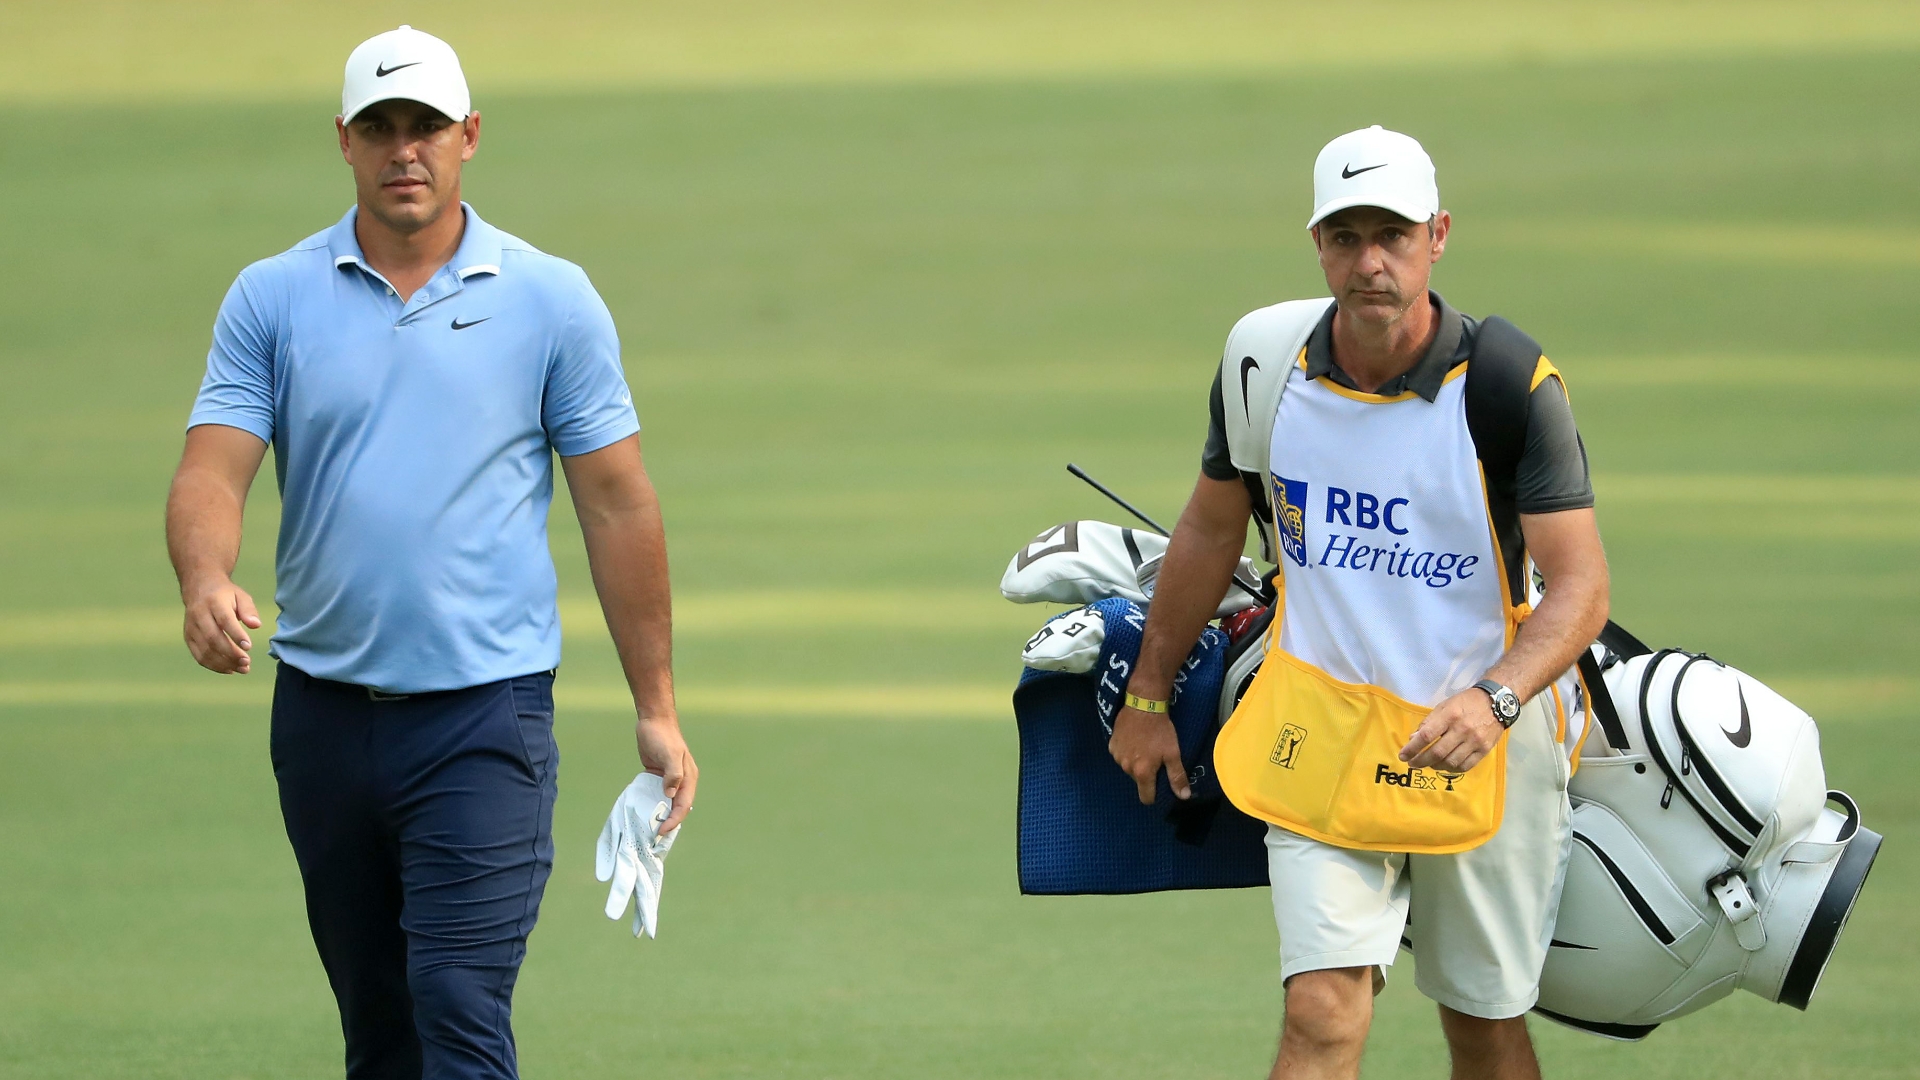 Brooks Koepka out of Travelers after caddie tests positive for COVID-19